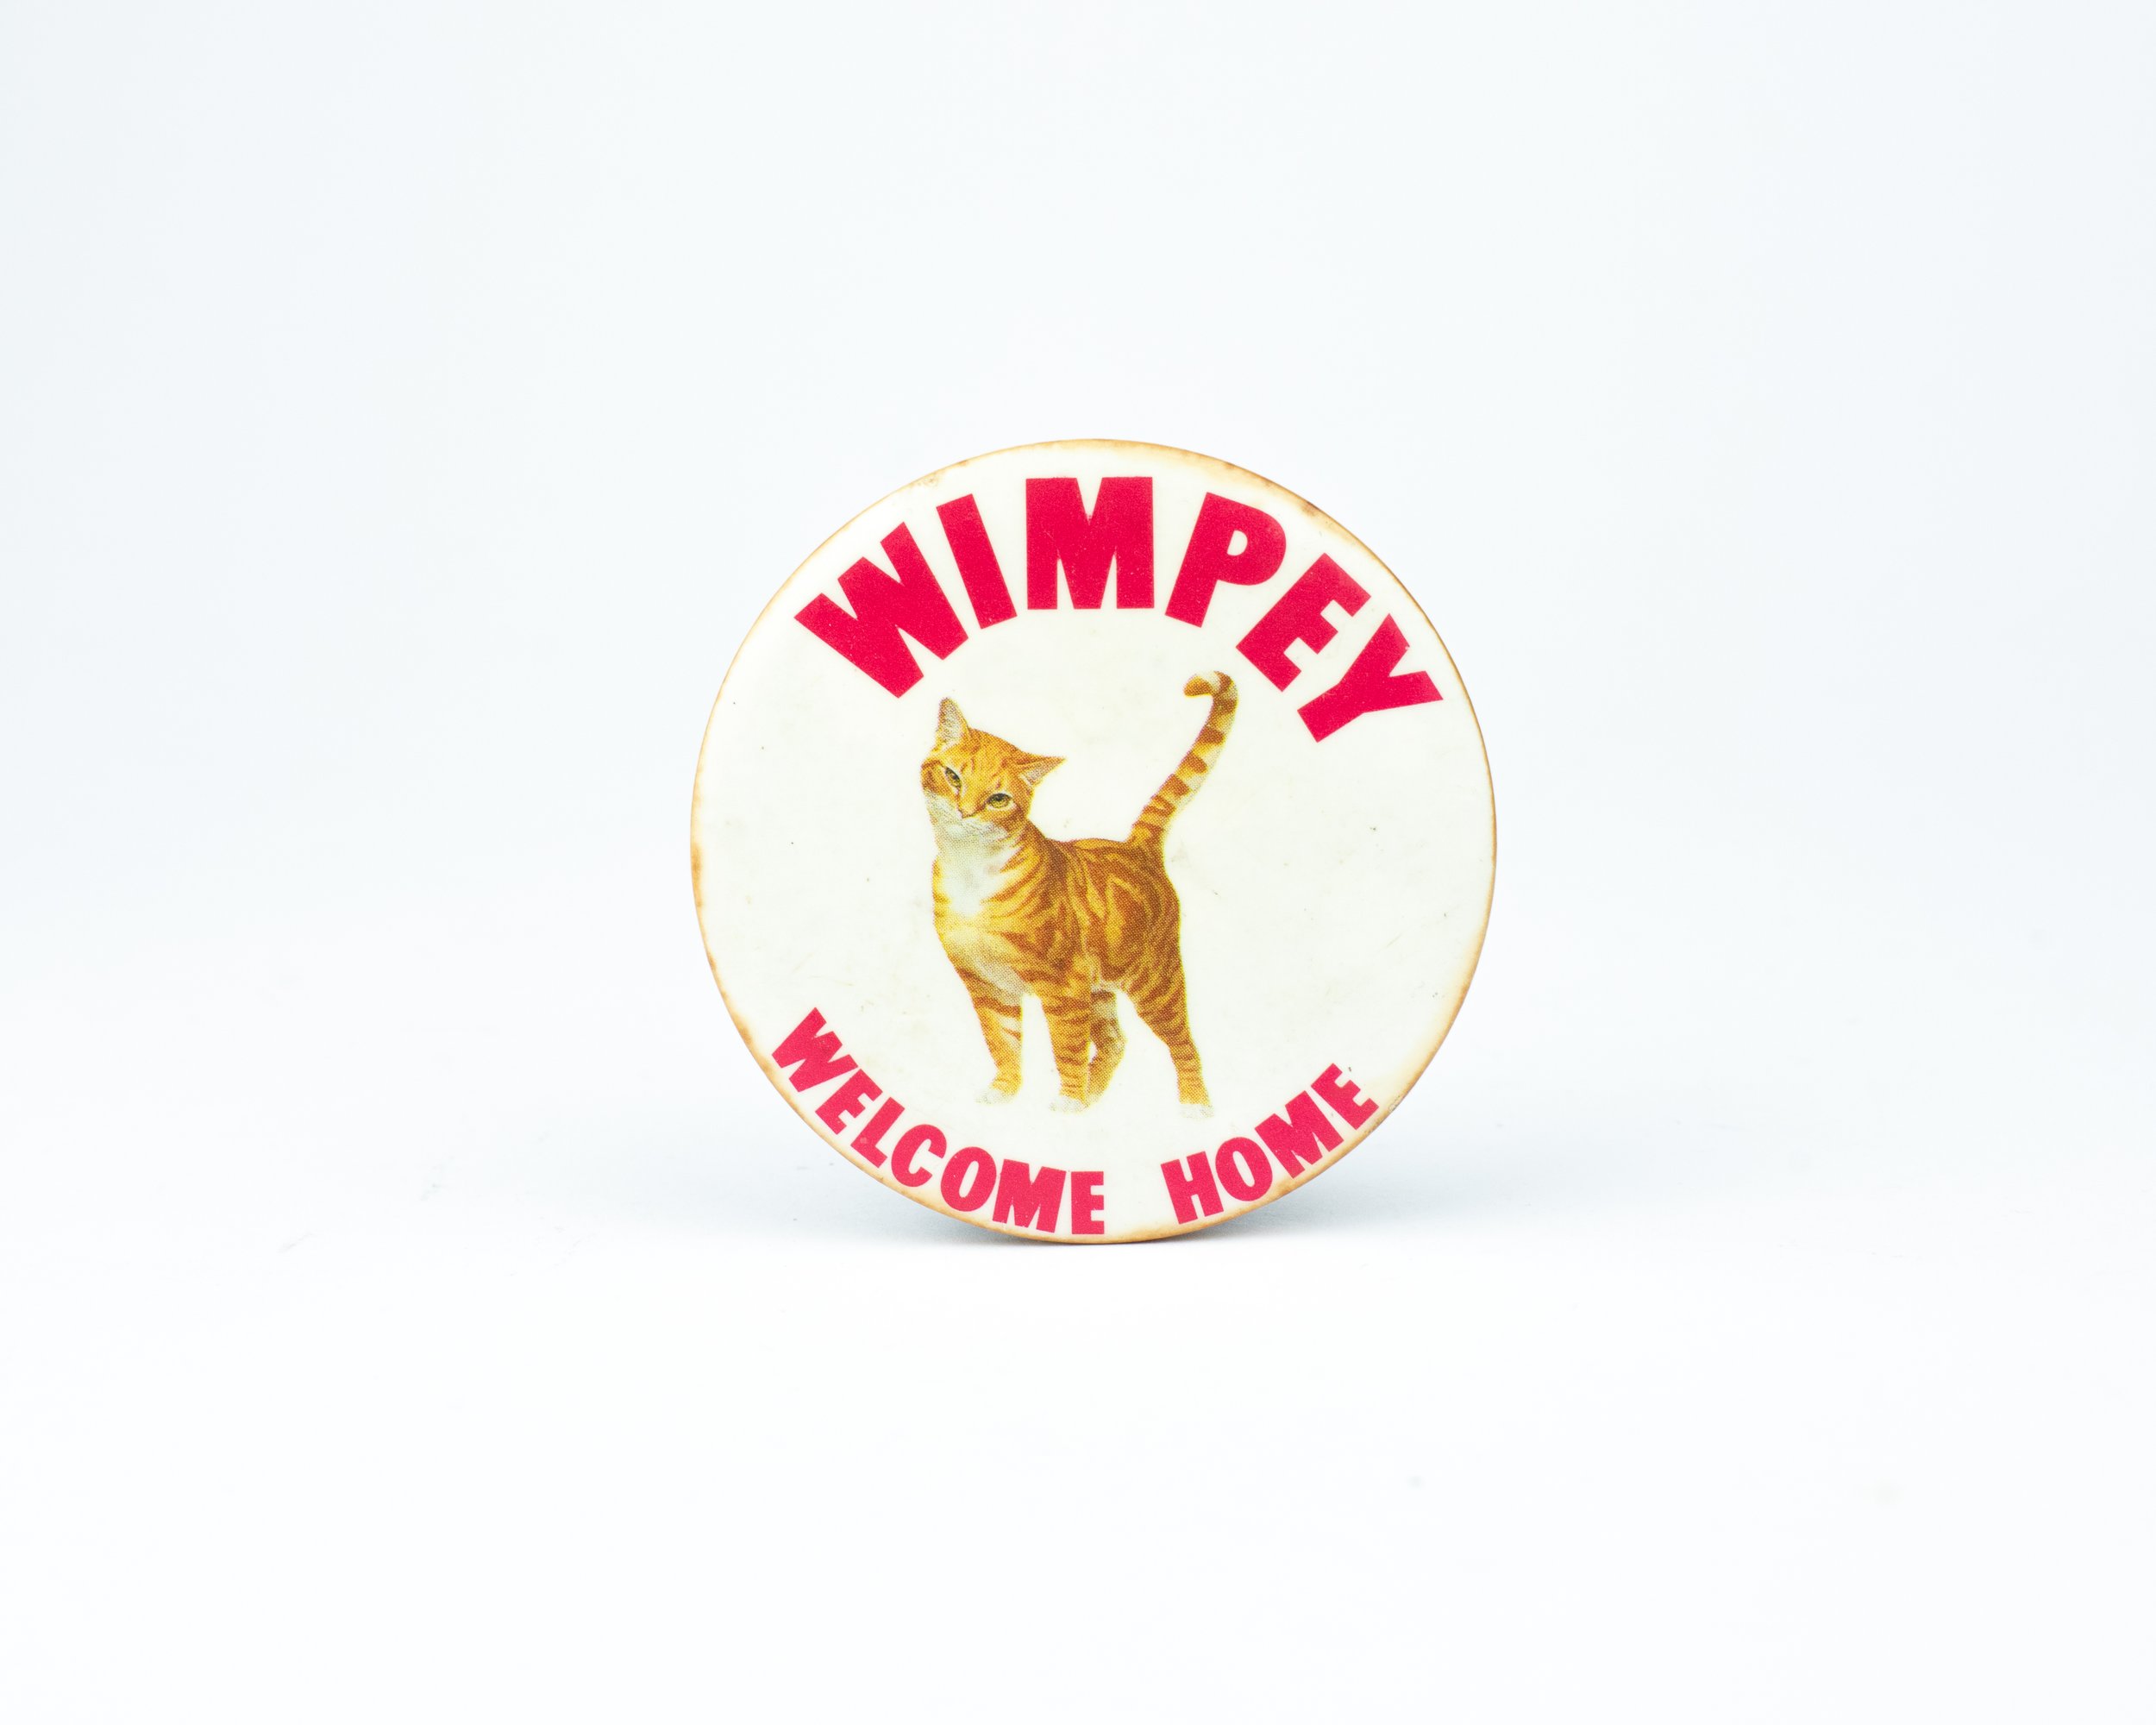  Taylor Wimpey Badge 